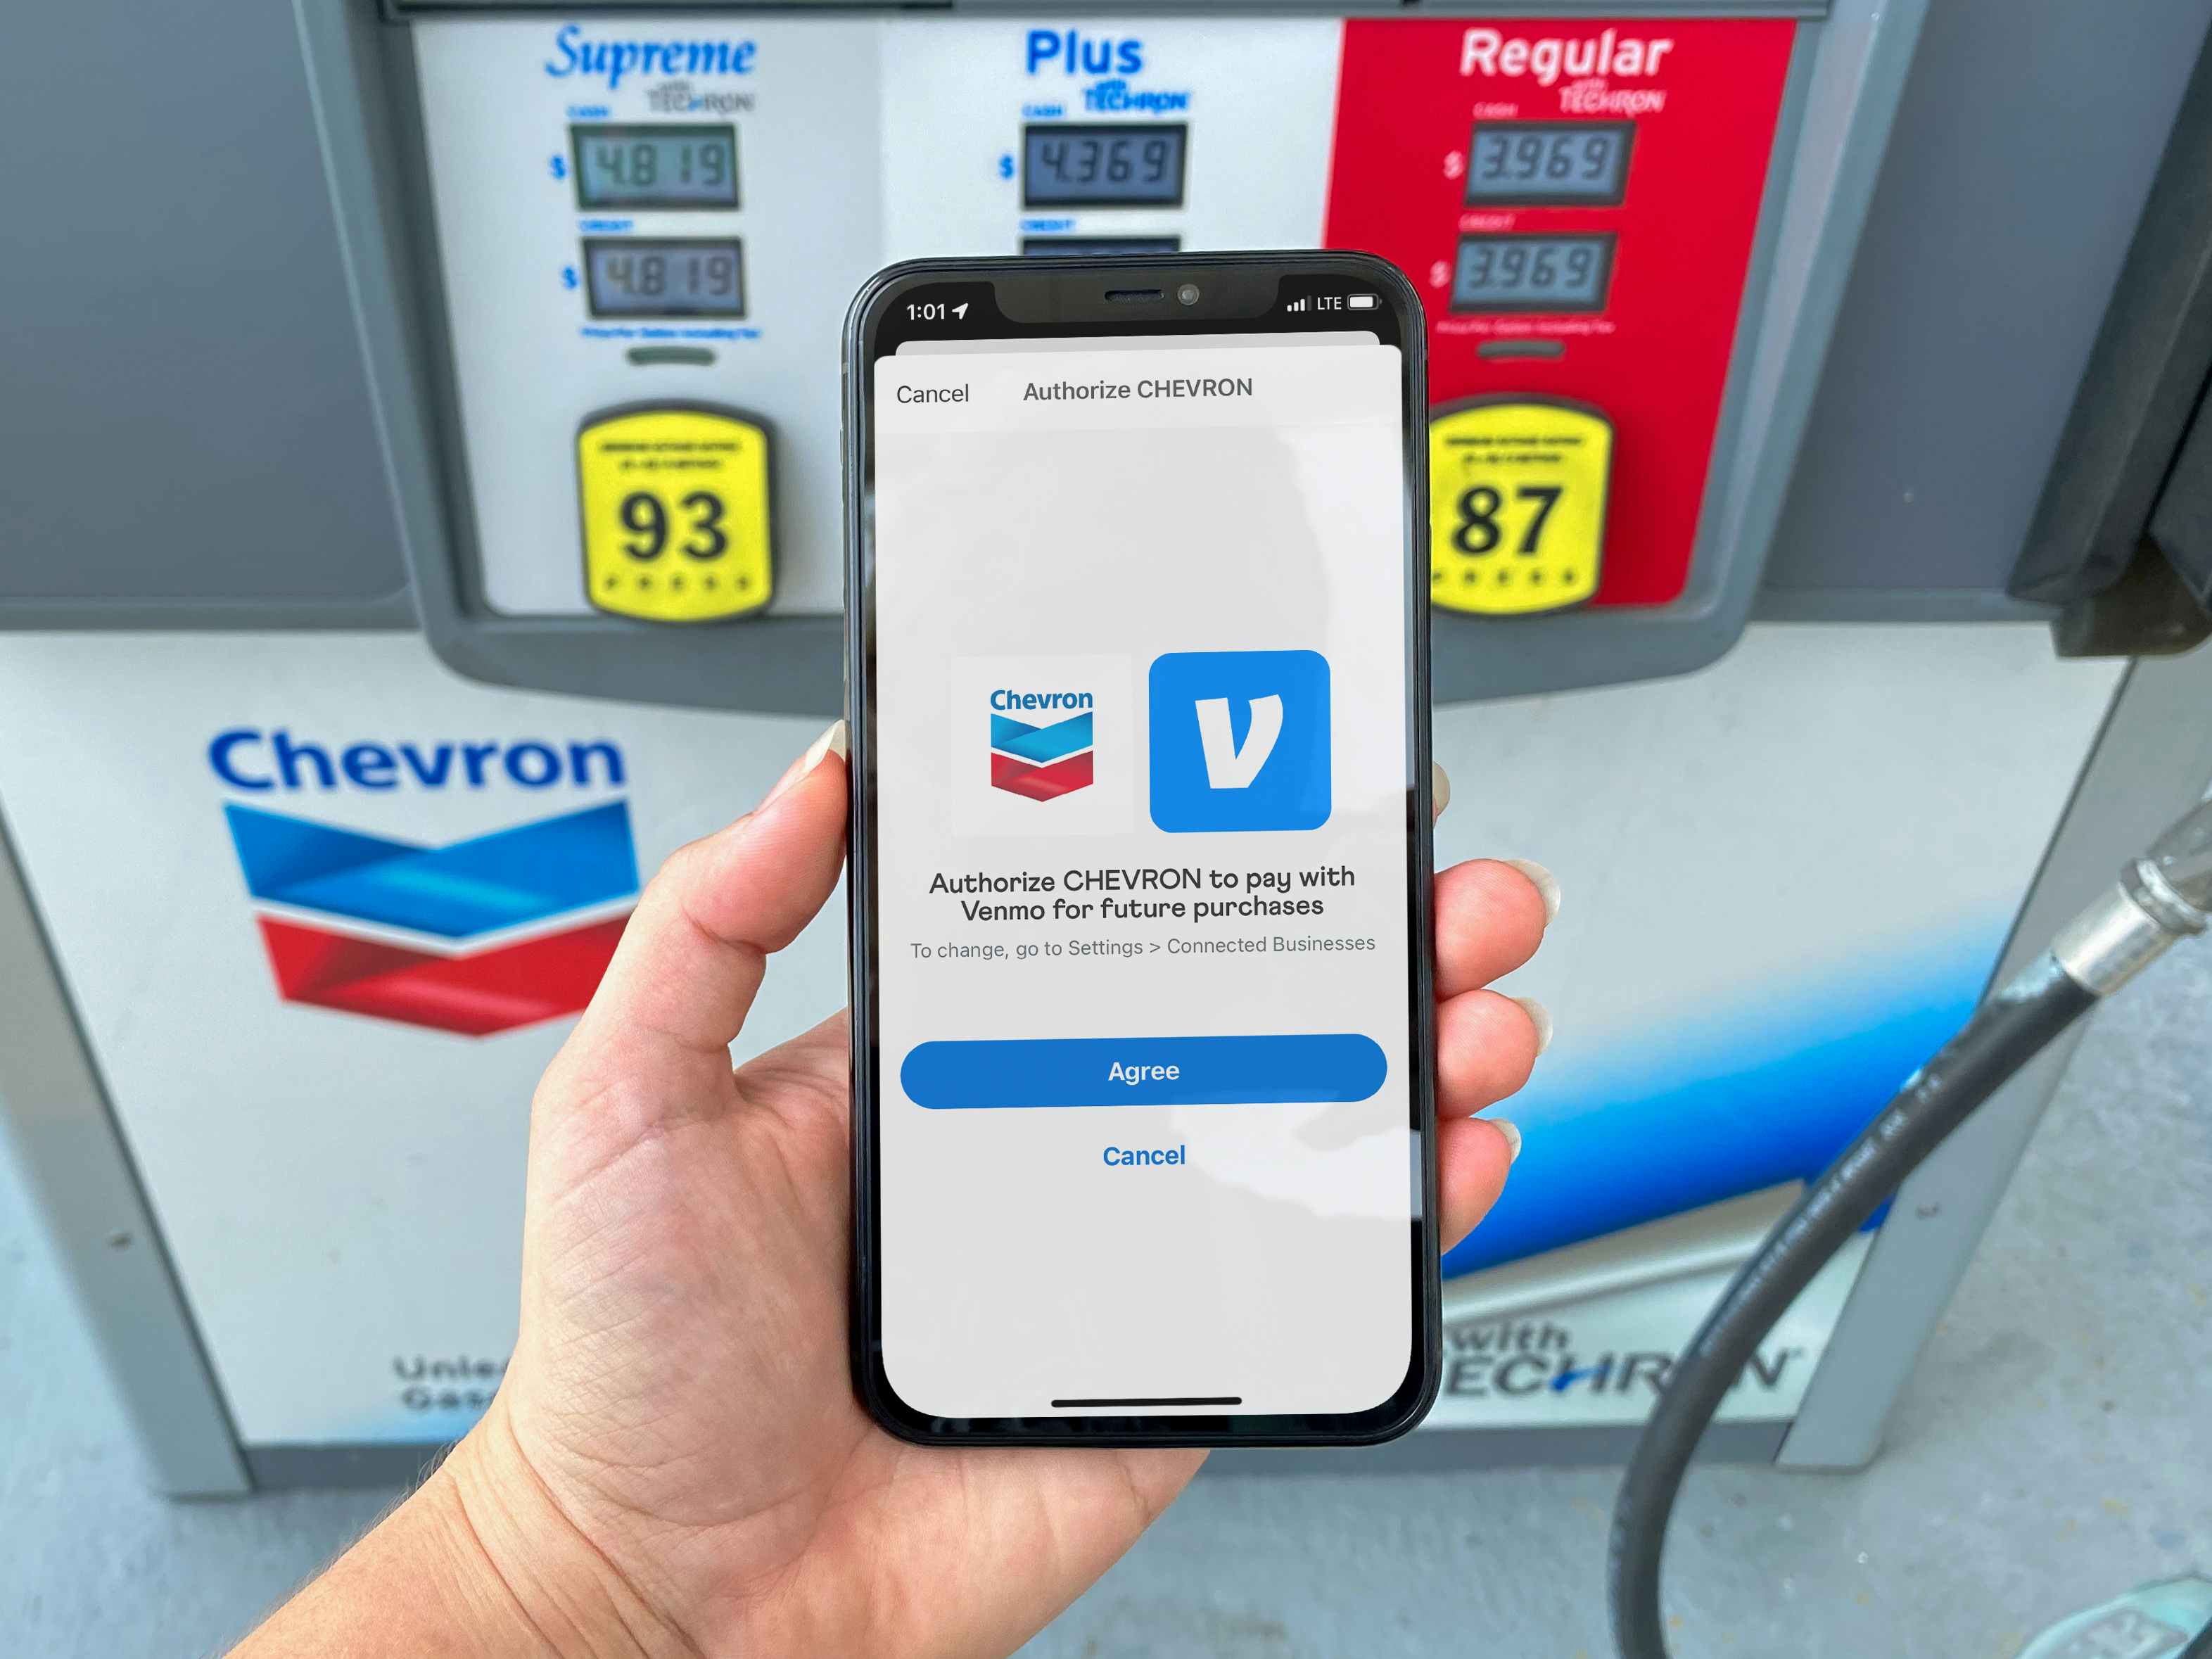 A person's hand holding an iPhone displaying the venmo authorization page in the Chevron mobile app in front of a Chevron gas station pump.